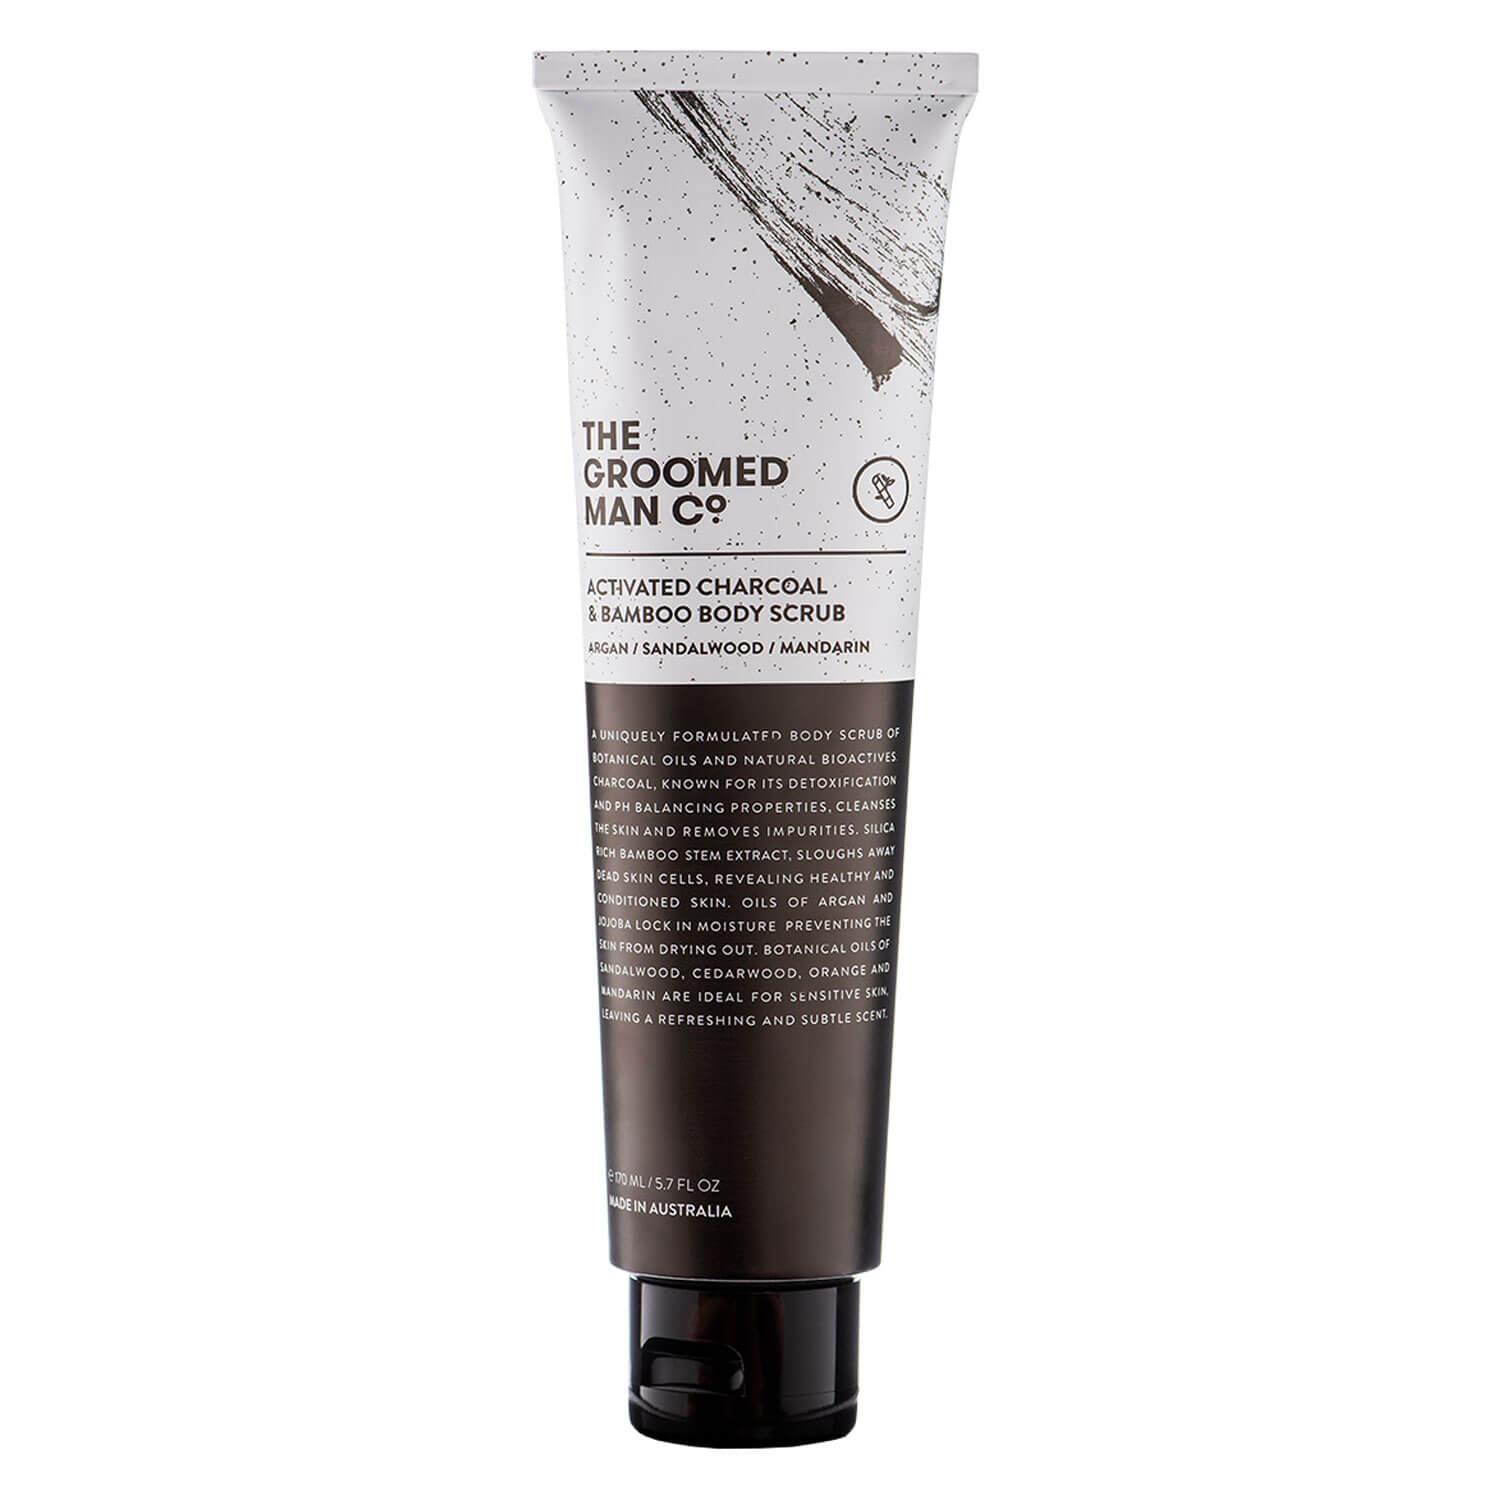 THE GROOMED MAN CO. - Activated Charcoal Body Scrub